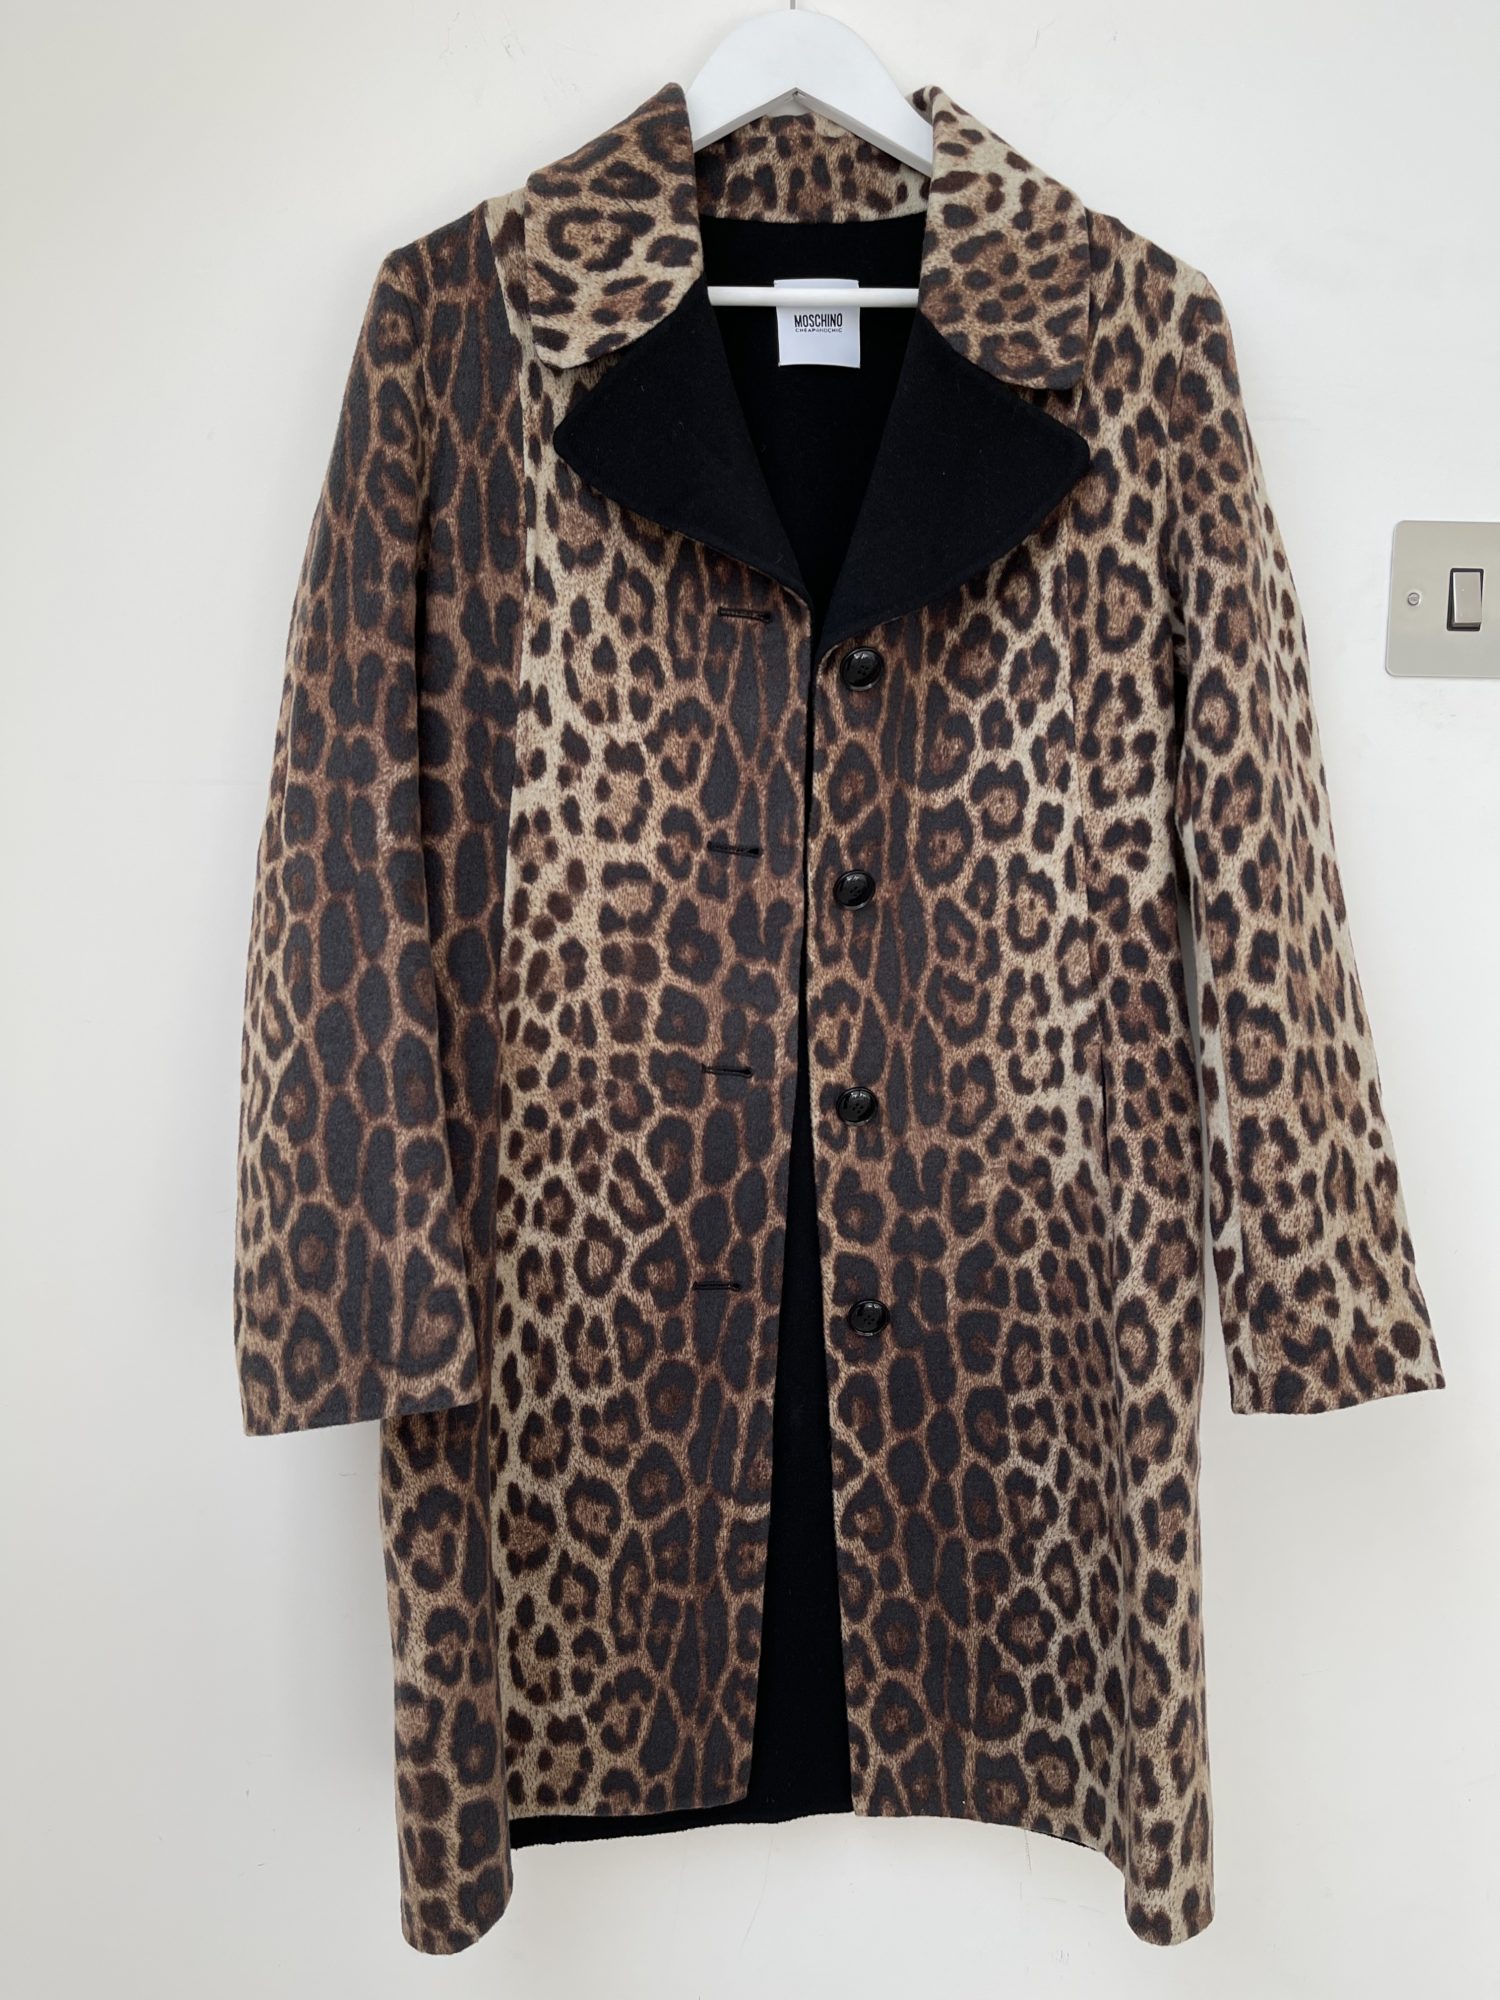 Moschino Cheap And Chic Leopard Print Coat – StyleSwap